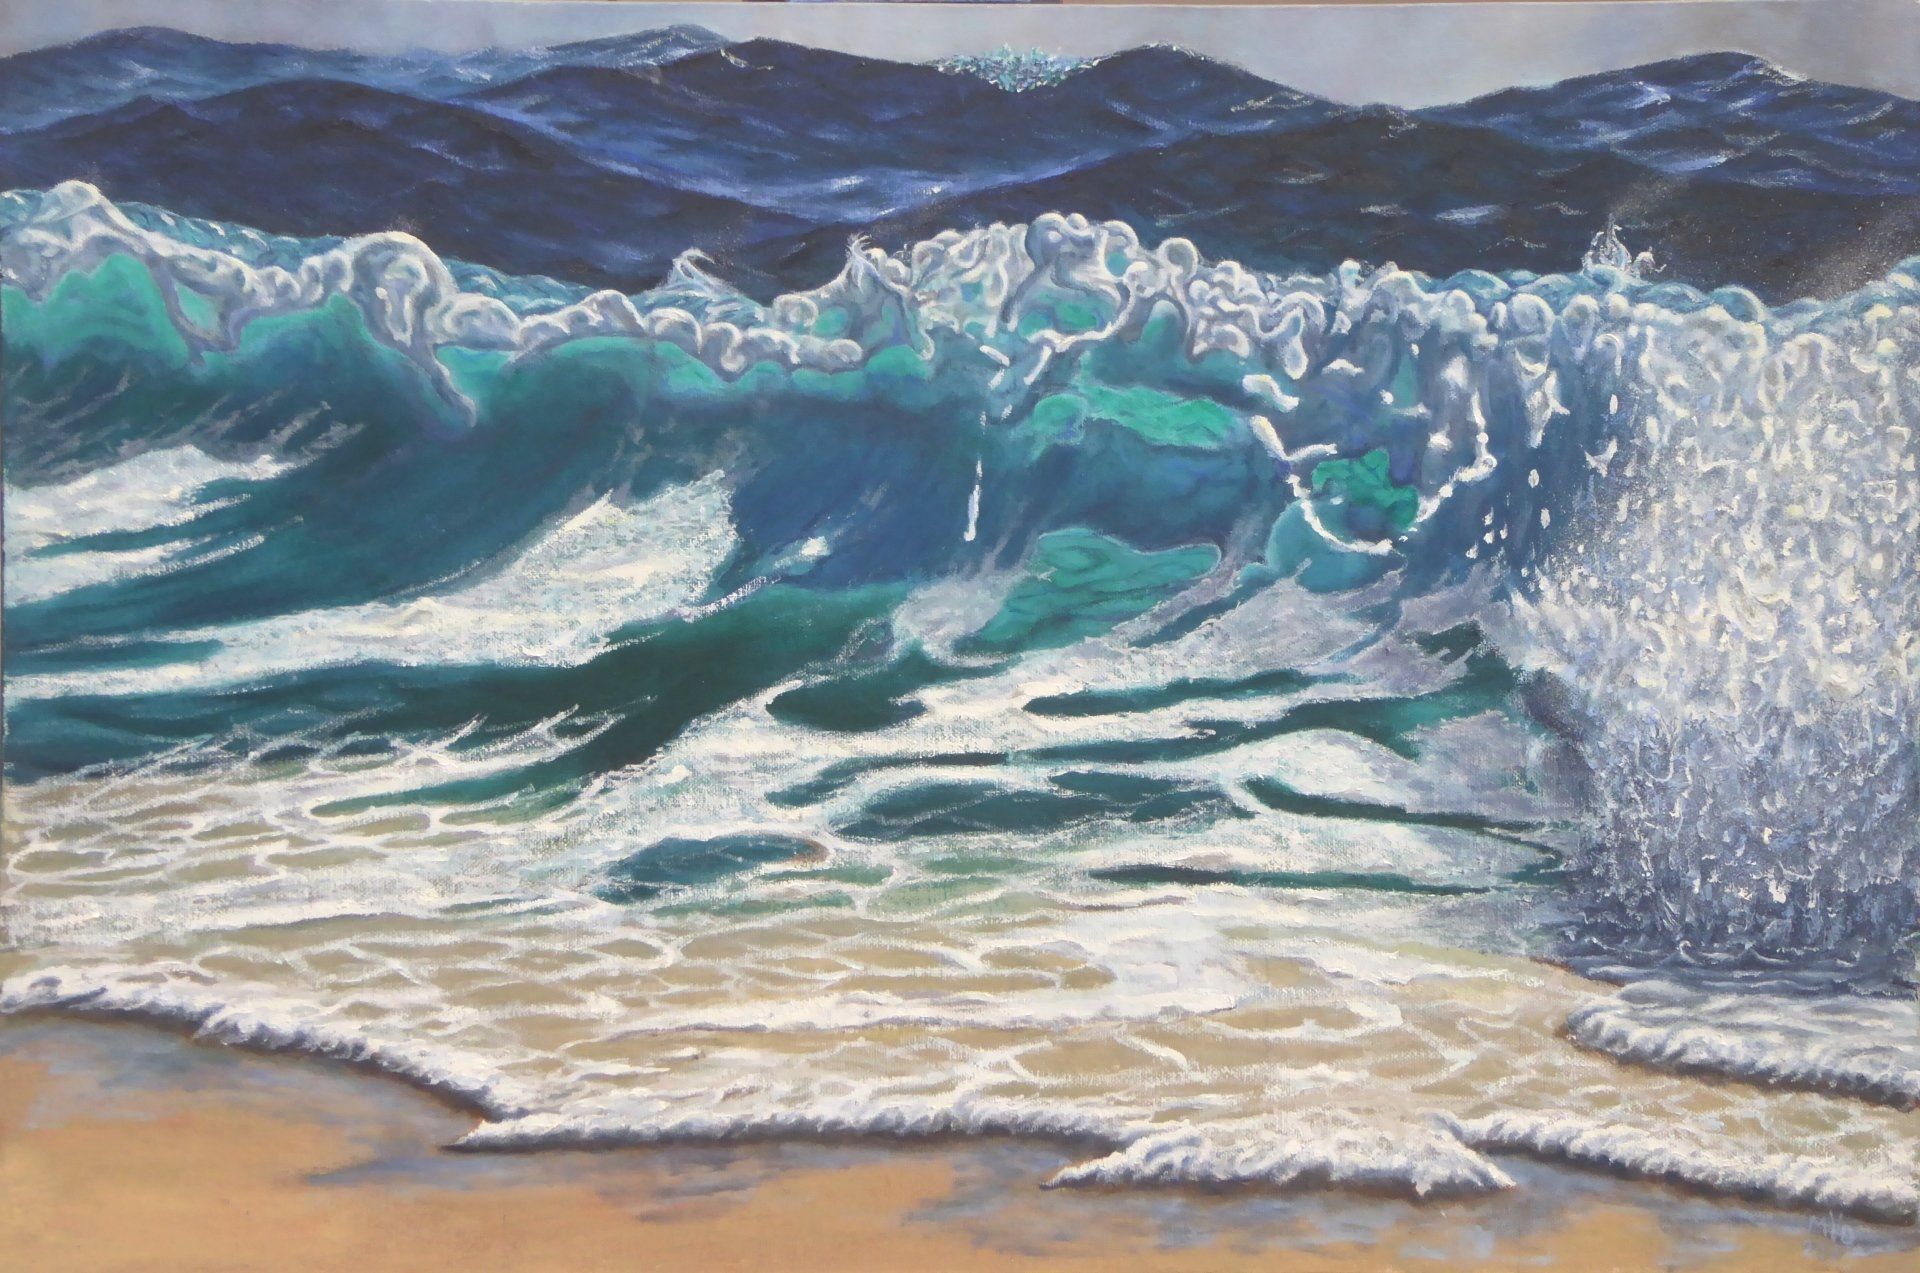 Painting of turquoise ocean Wave.